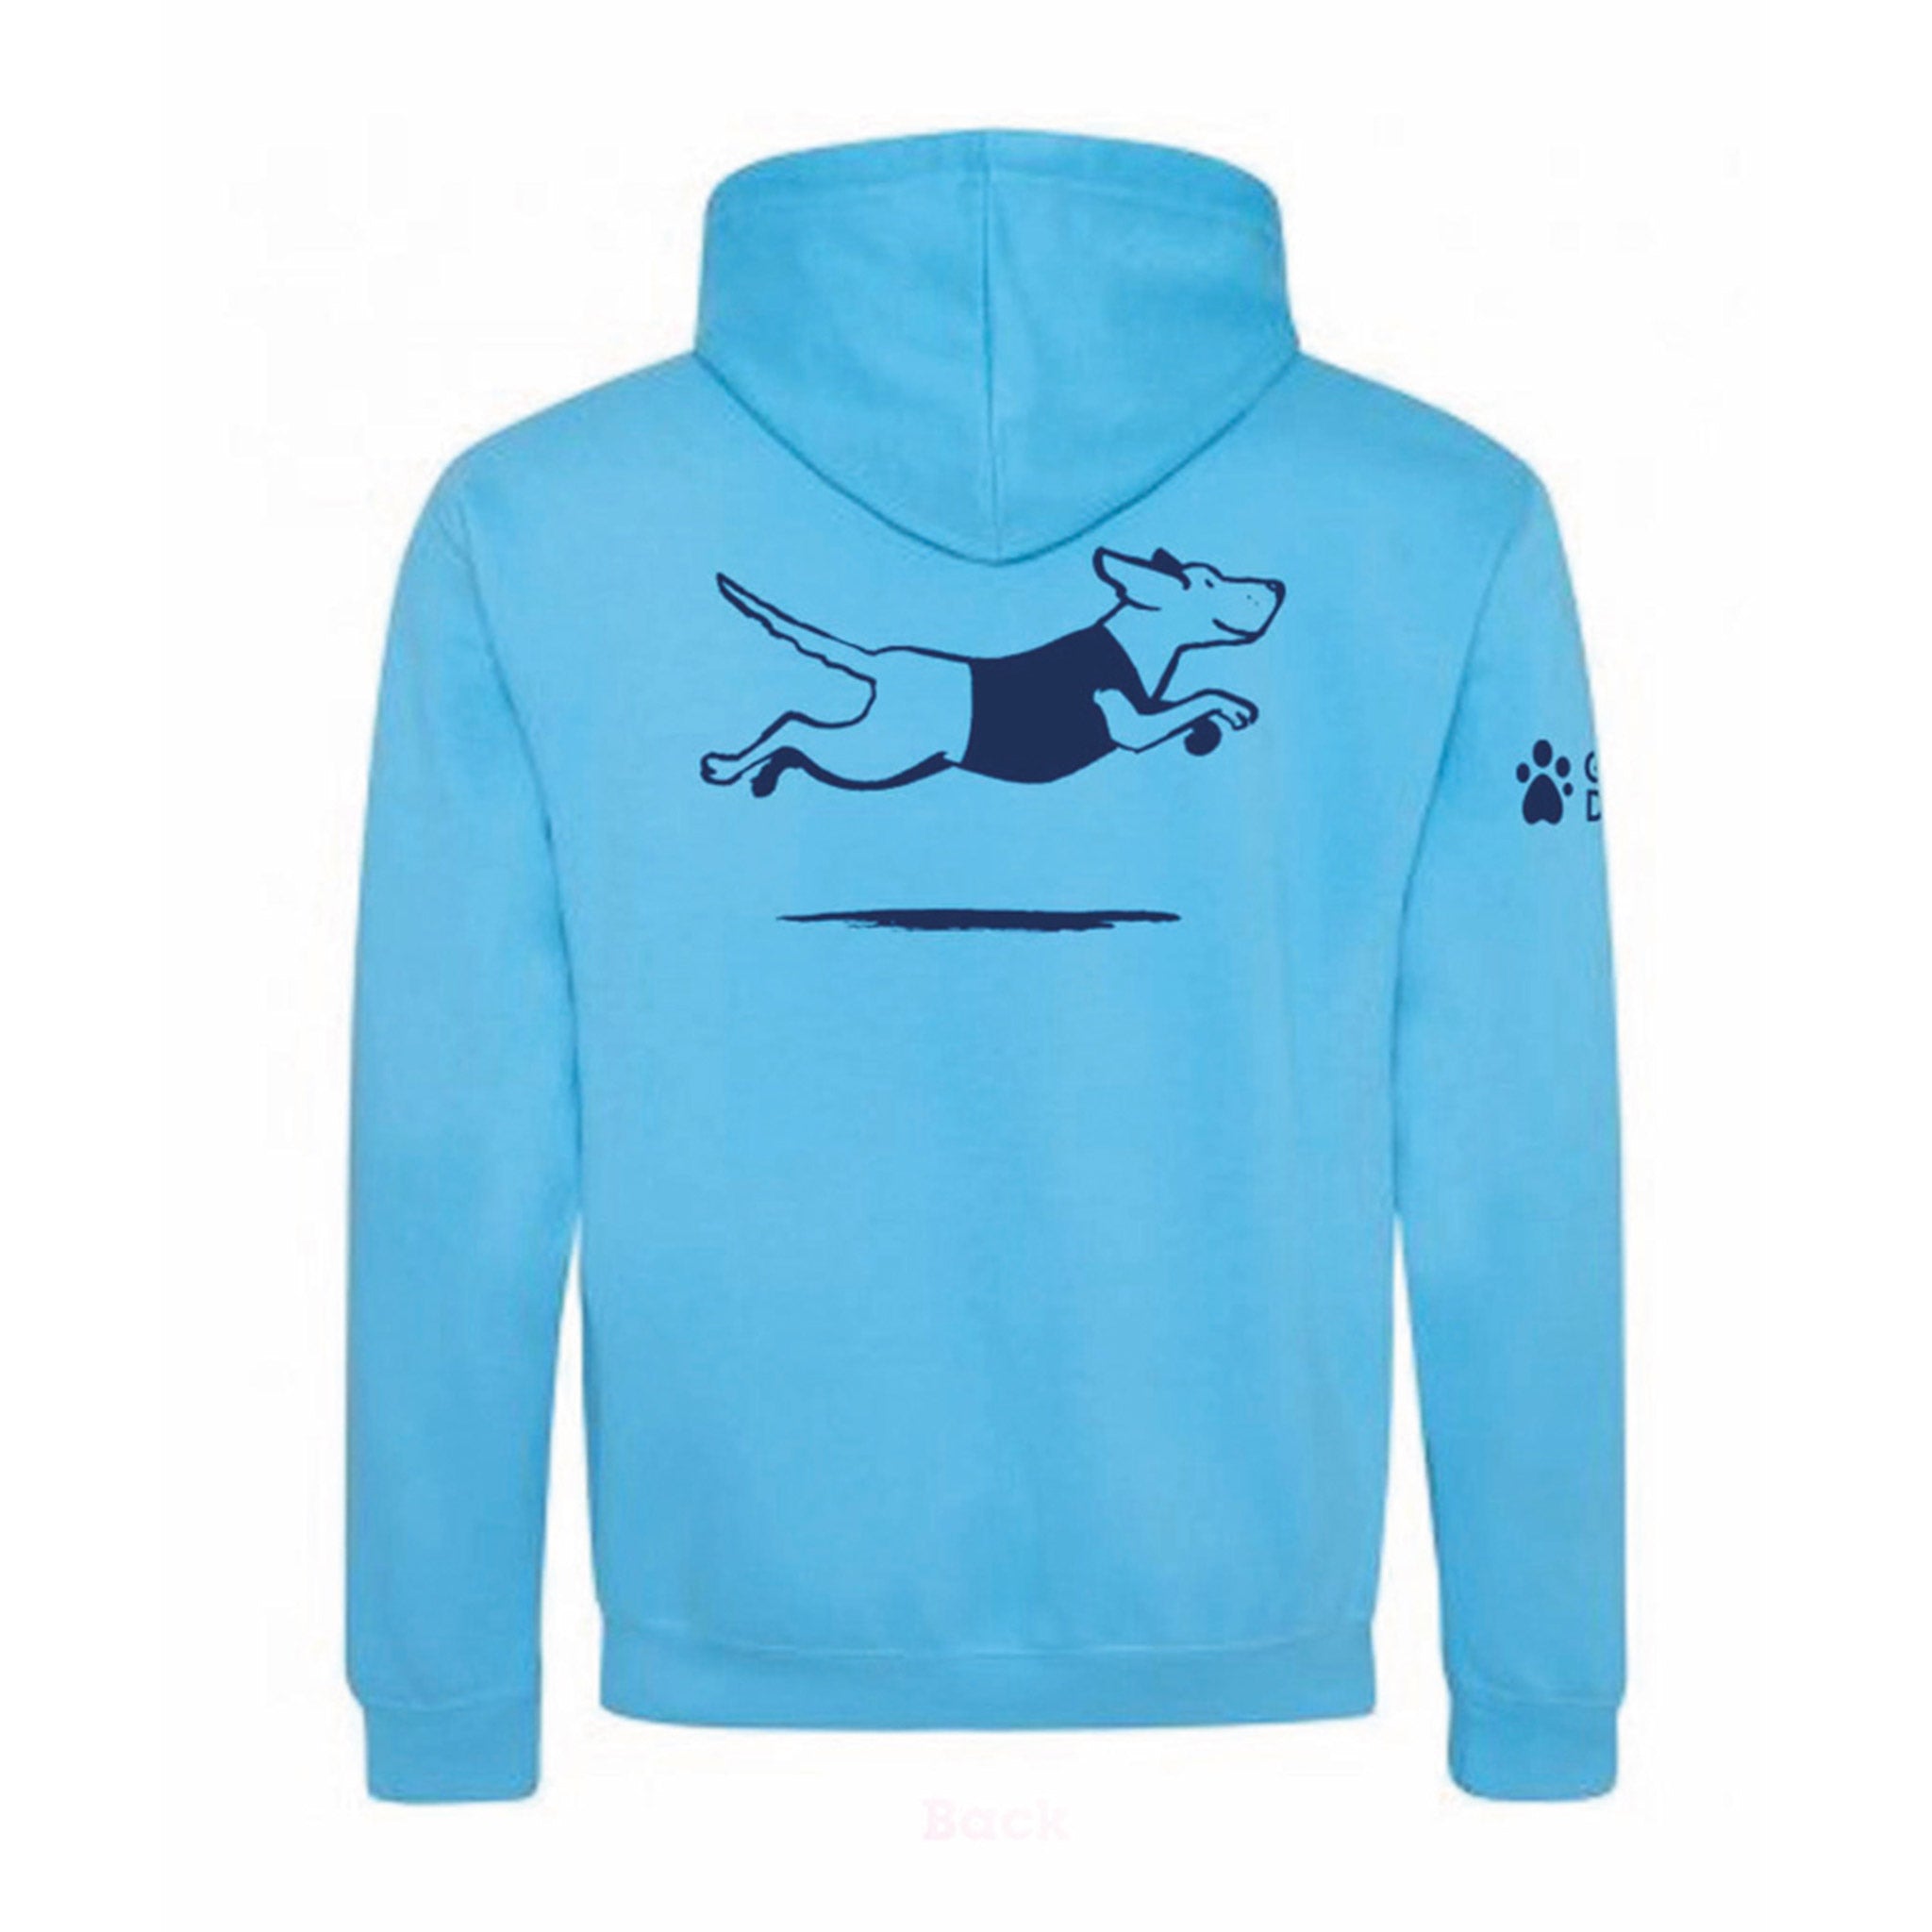 Image shows the back of a blue hoodie, there is leaping Labrador design printed on the front in dark blue and the Guide Dogs logo is printed on the right sleeve.